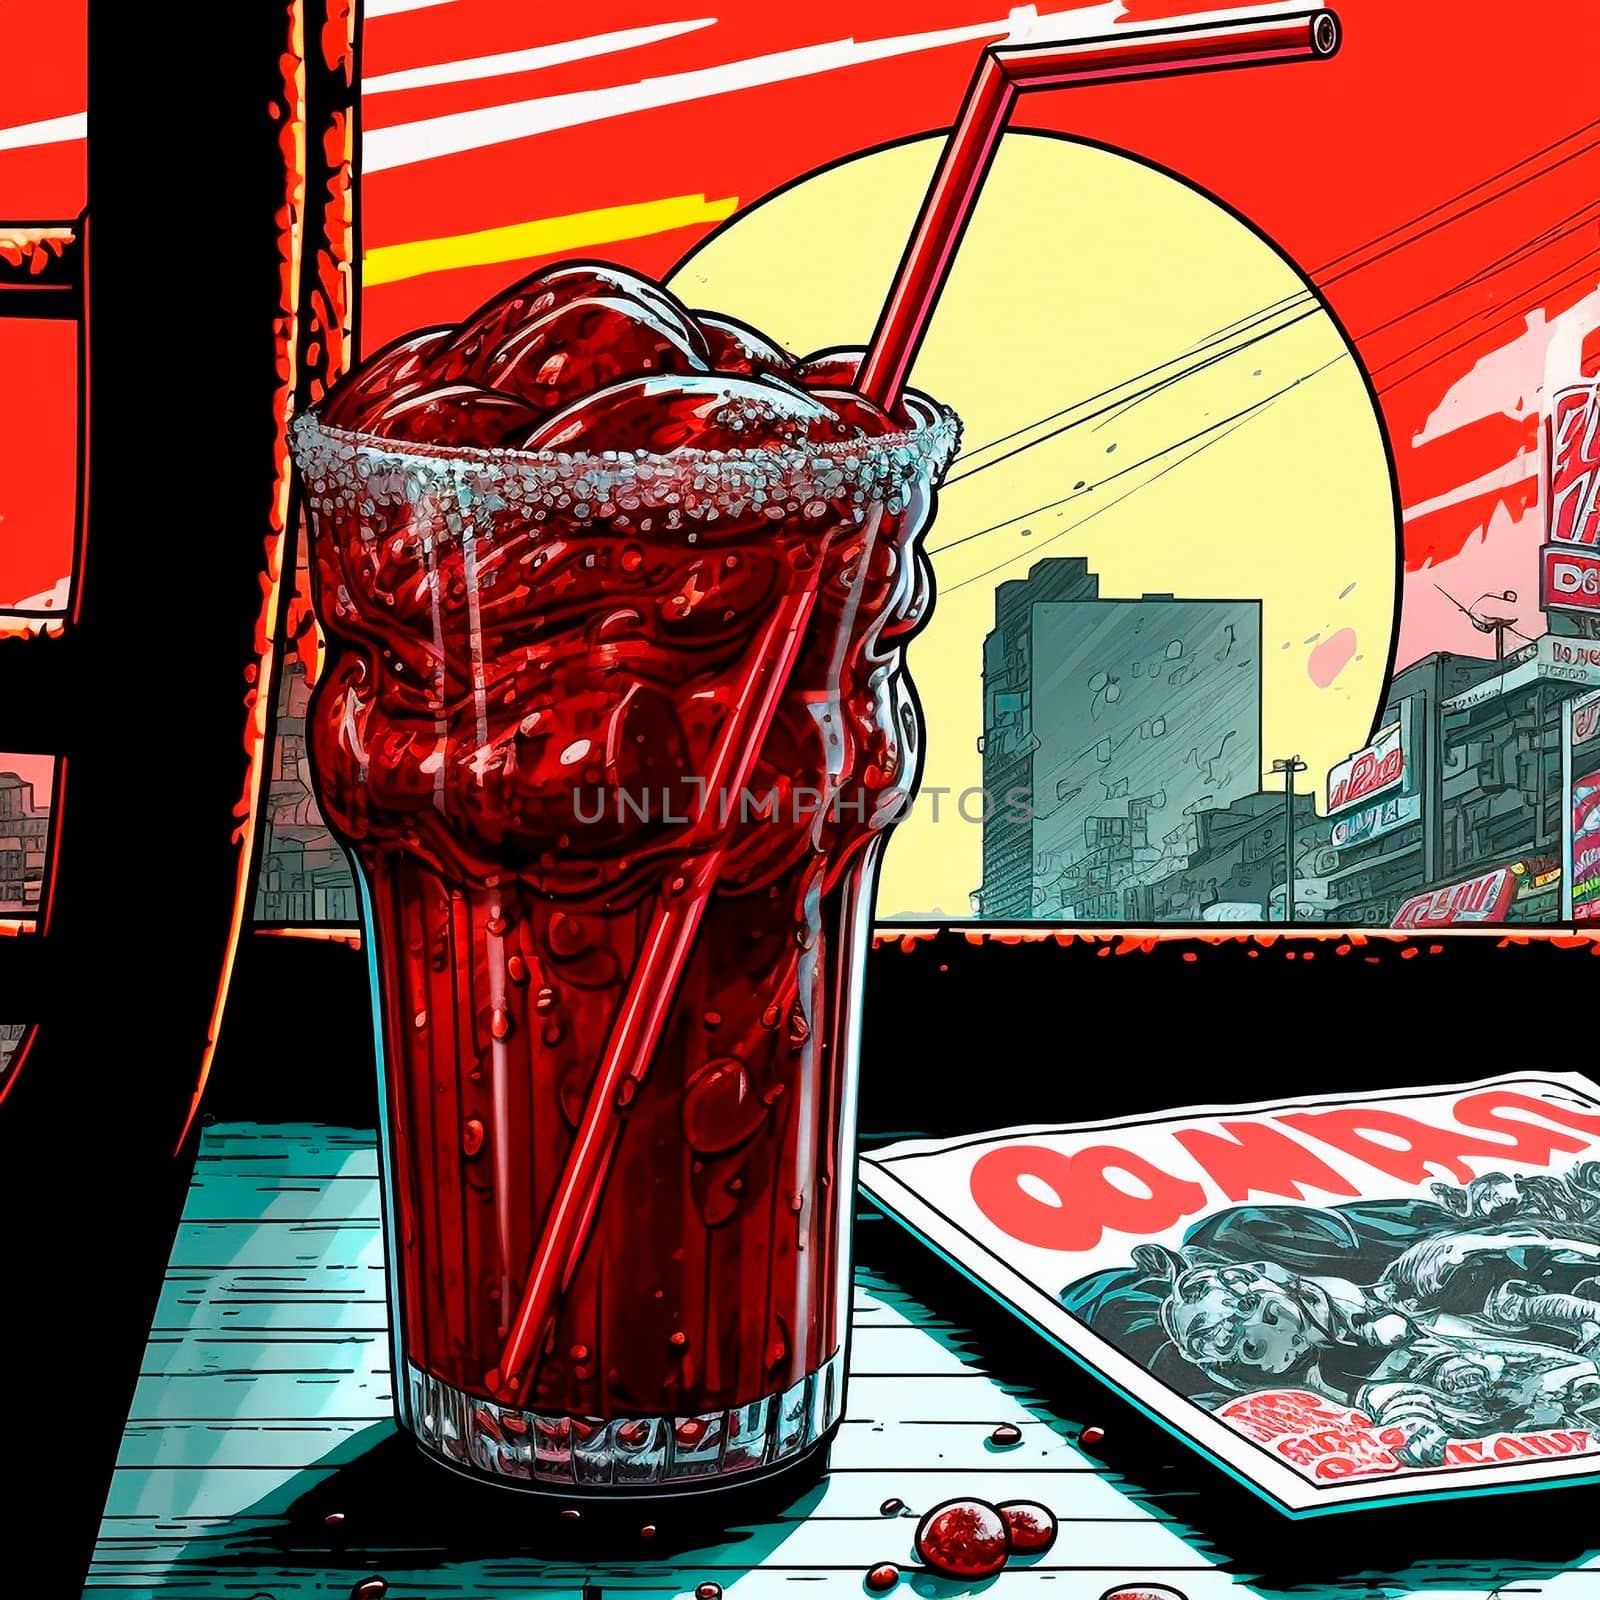 An image of a glass of cola on the table in an old diner. Comic style by NeuroSky